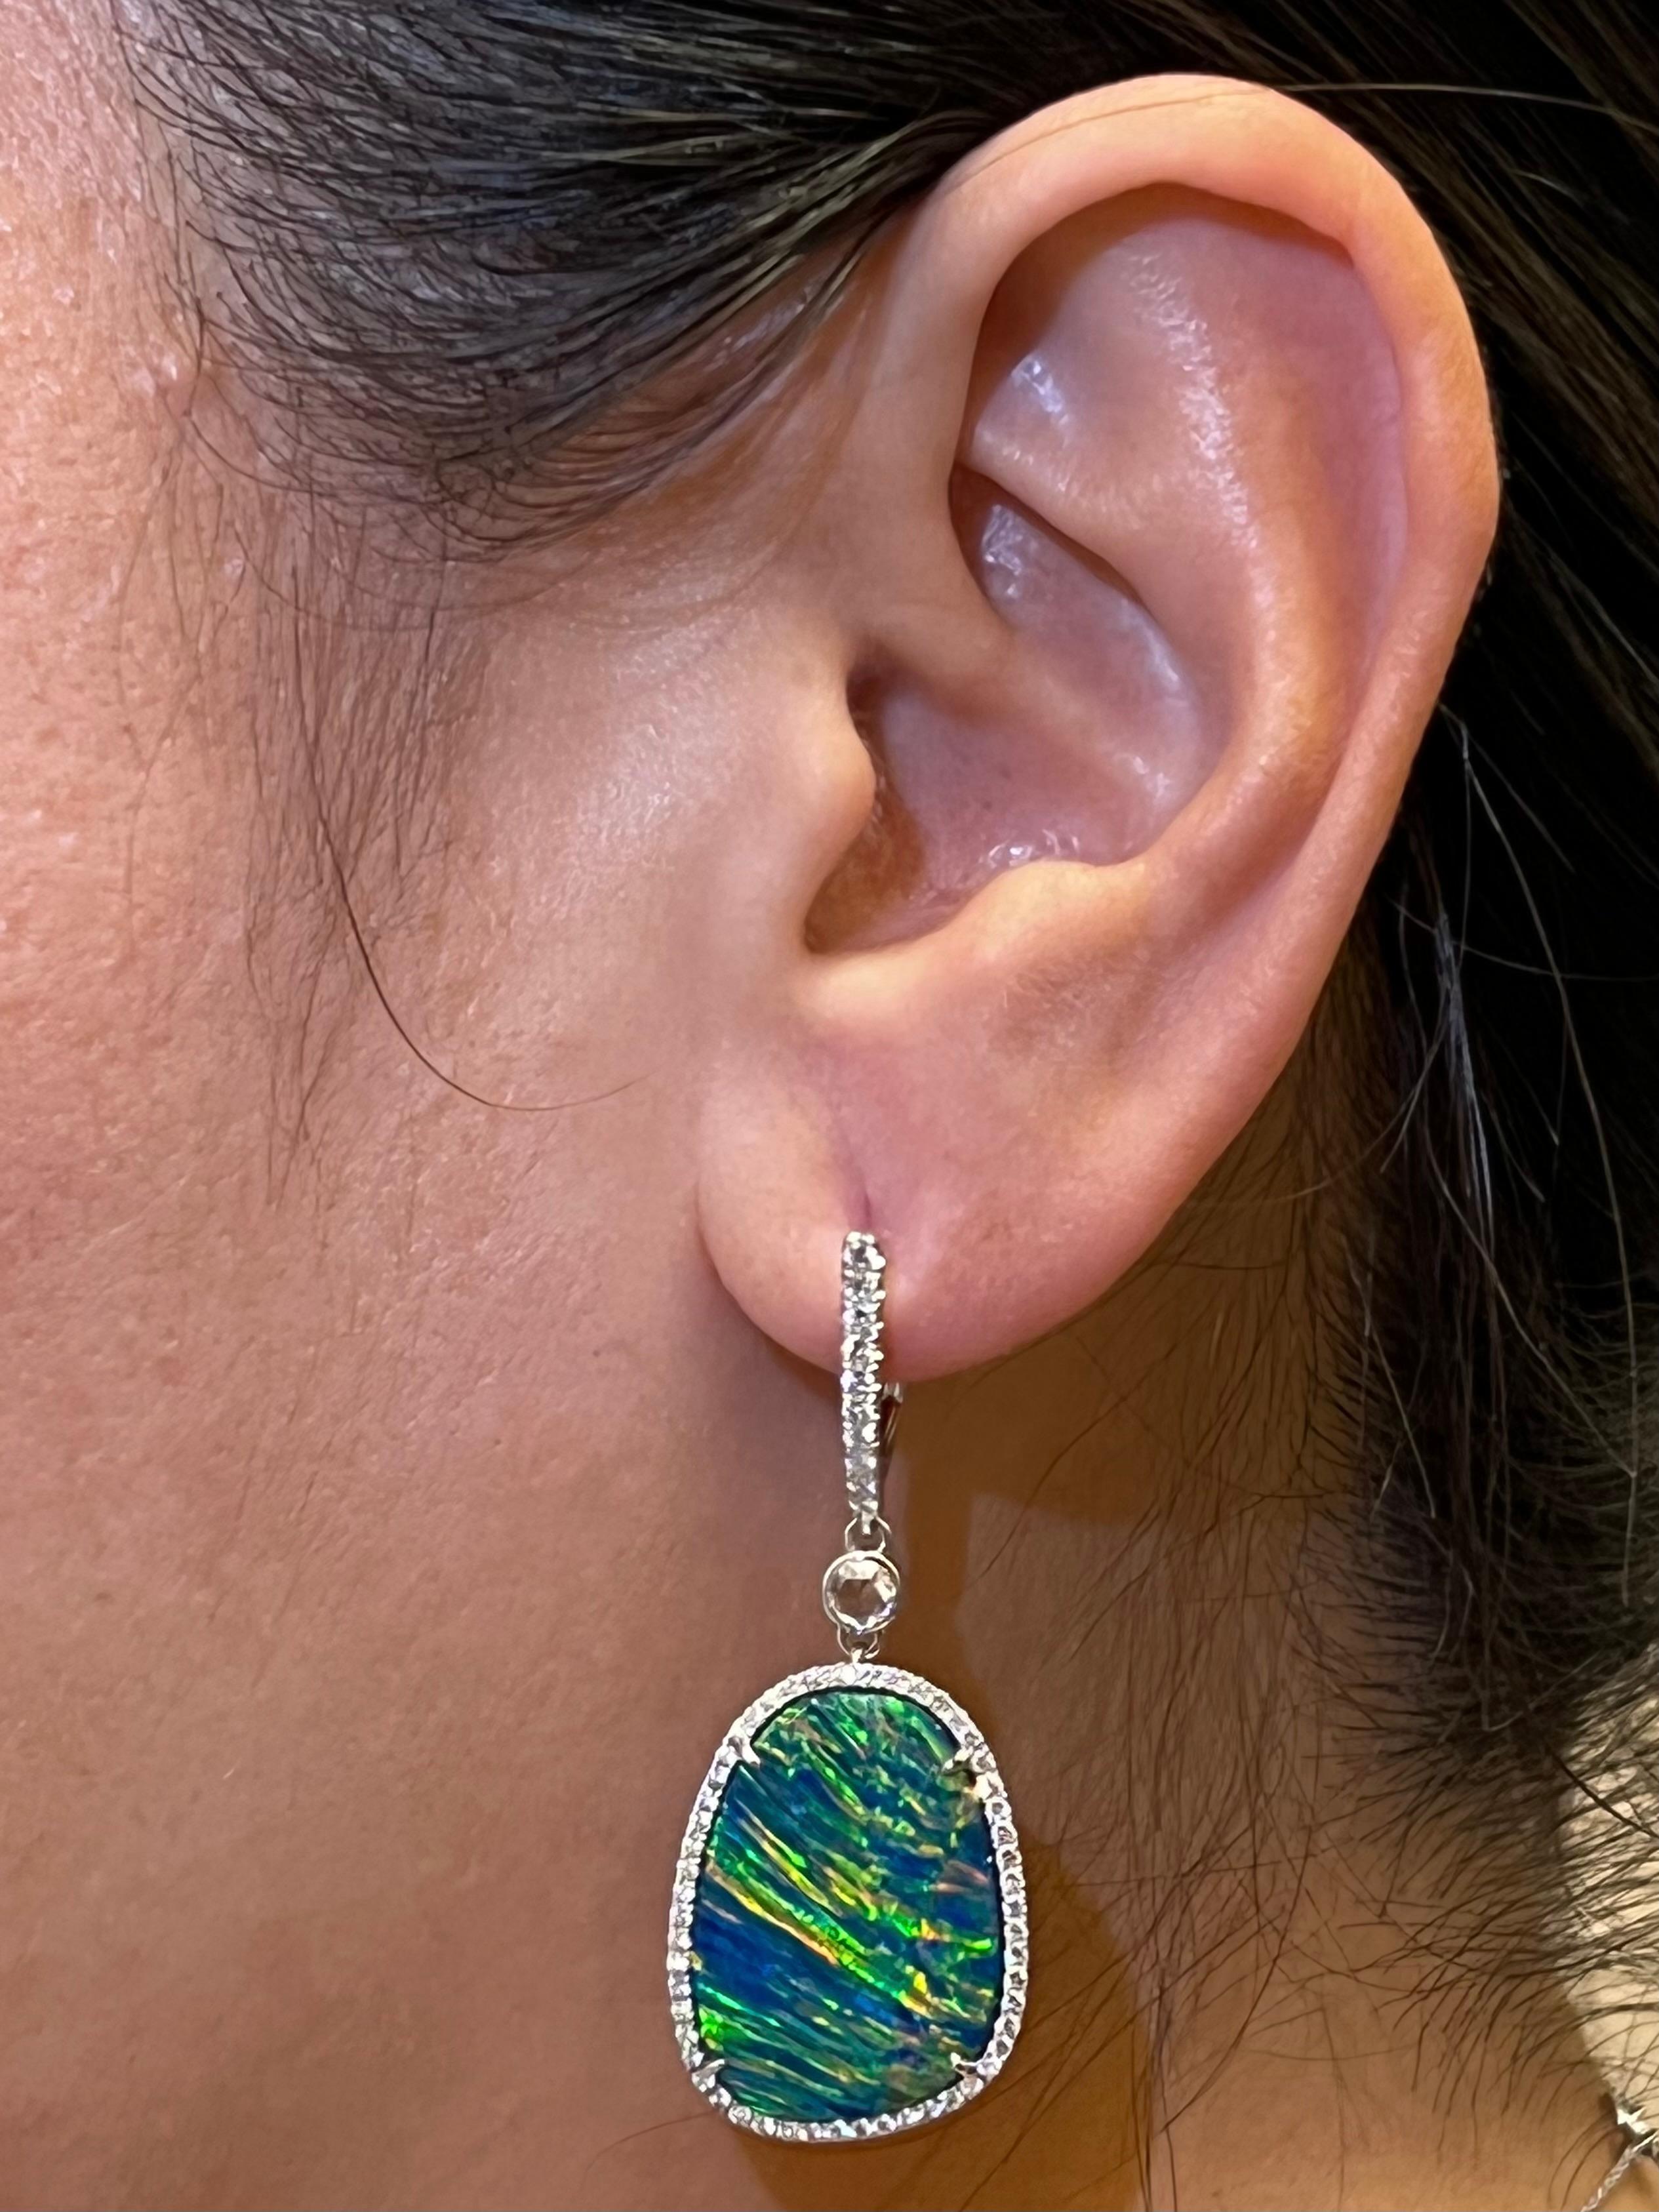 Please check out the HD video! These are Australian doublet Opals. Extremely difficult to find a matching pair this quality! When it comes to opals, one of the most important character people look for is the play of color. The Australian opals in